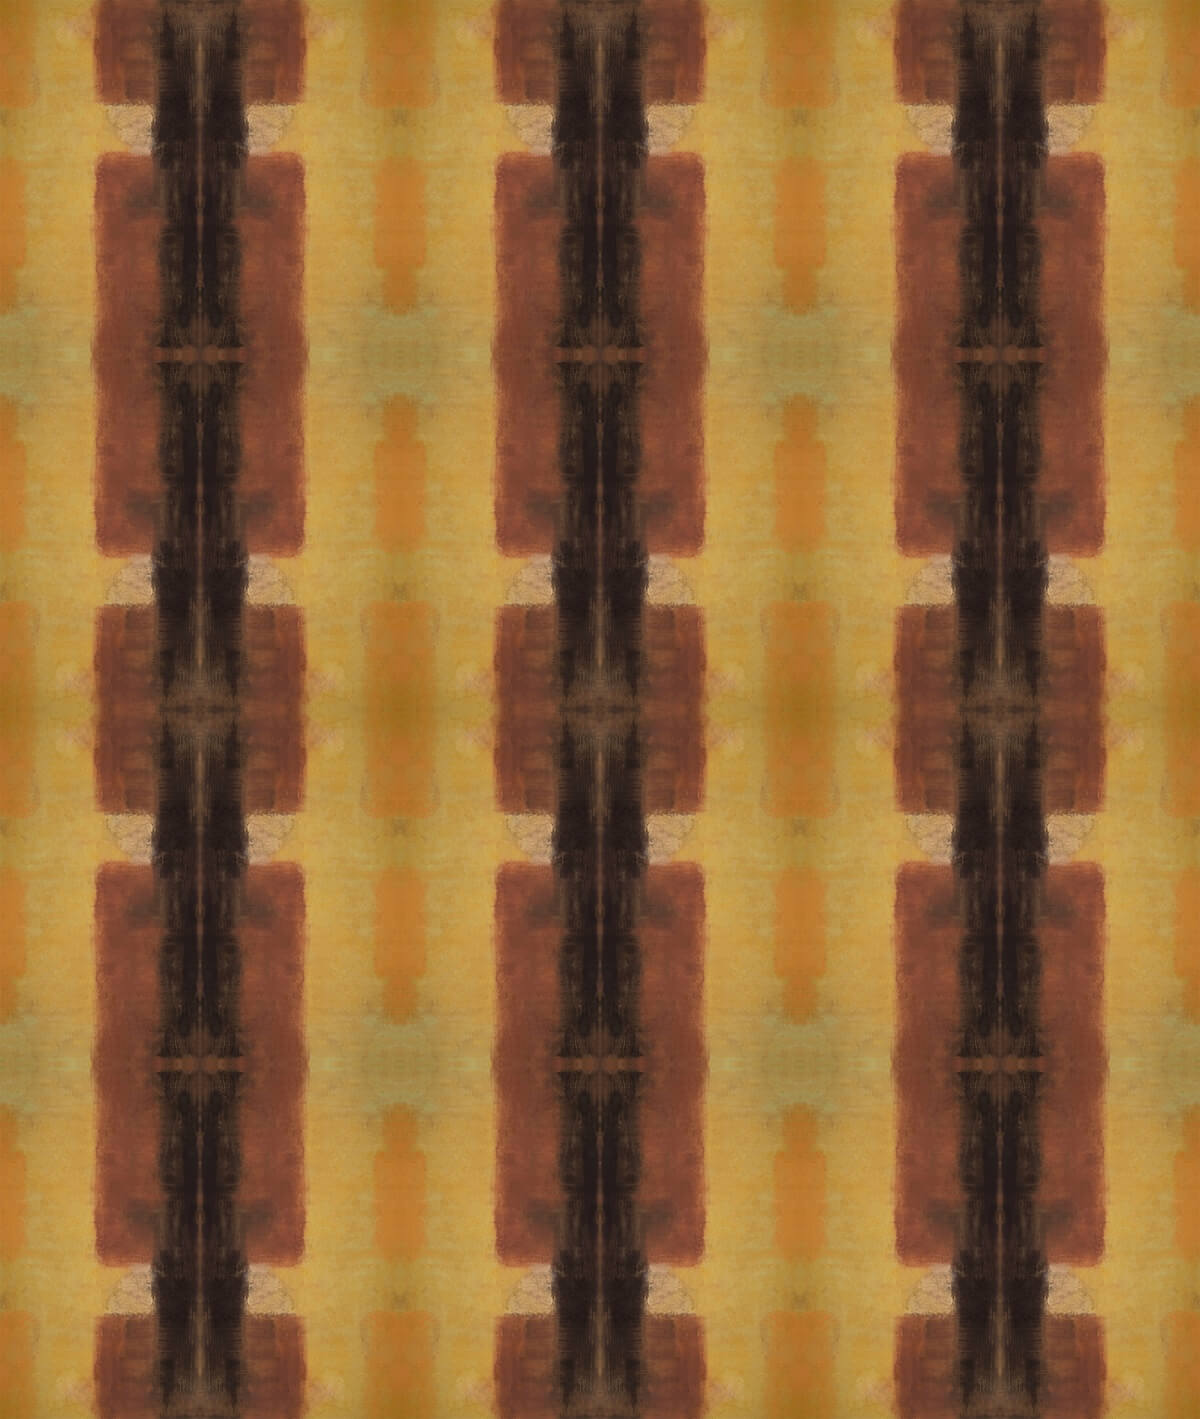 Gloucester pattern in black, brown, and mustard yellow